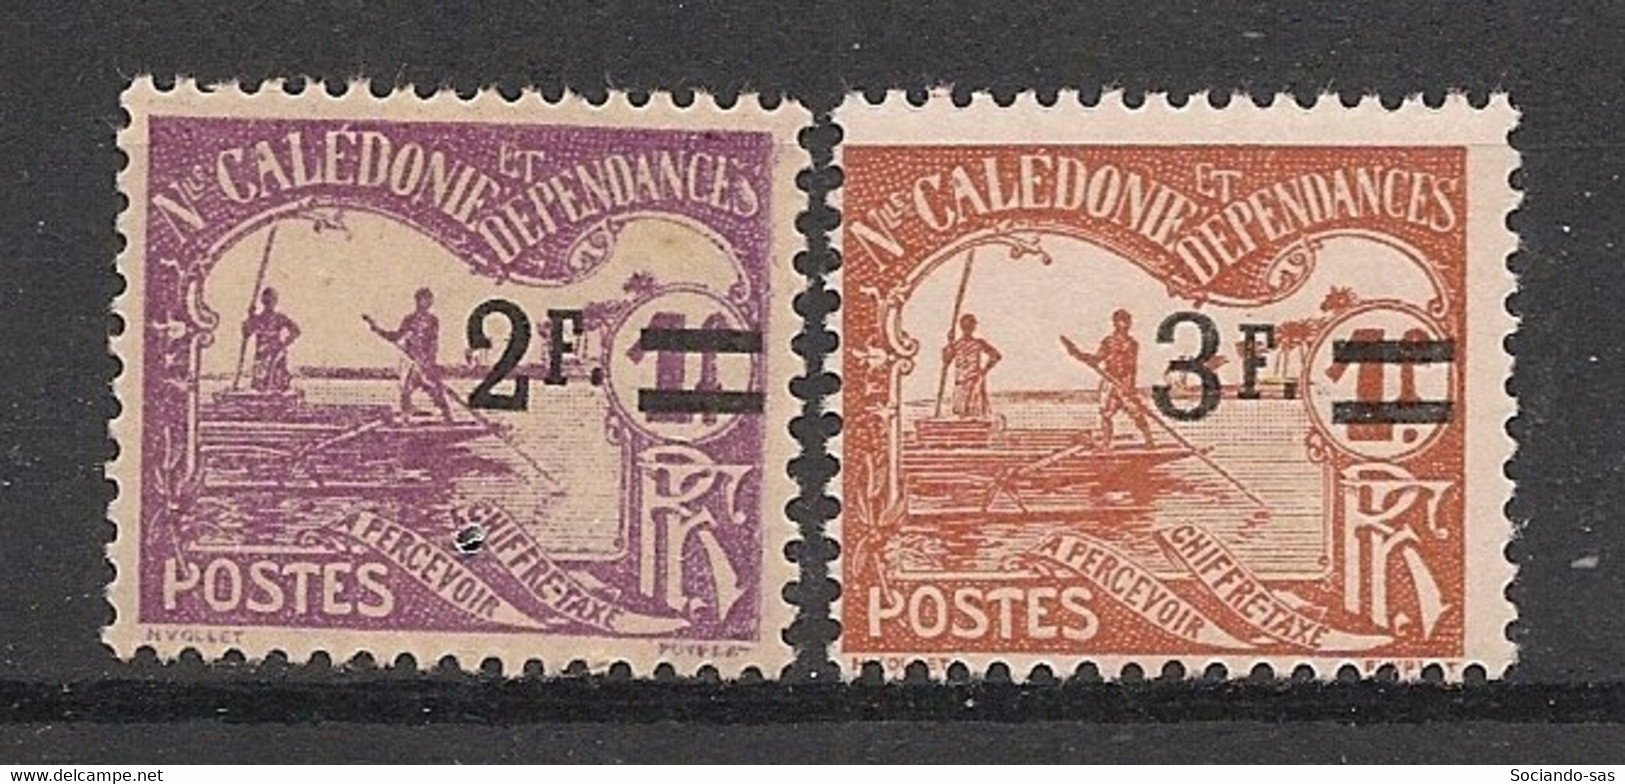 NOUVELLE CALEDONIE - 1926-27 - Taxe TT N°Yv. 24 à 25 - Série Complète - Neuf Luxe ** / MNH / Postfrisch - Timbres-taxe